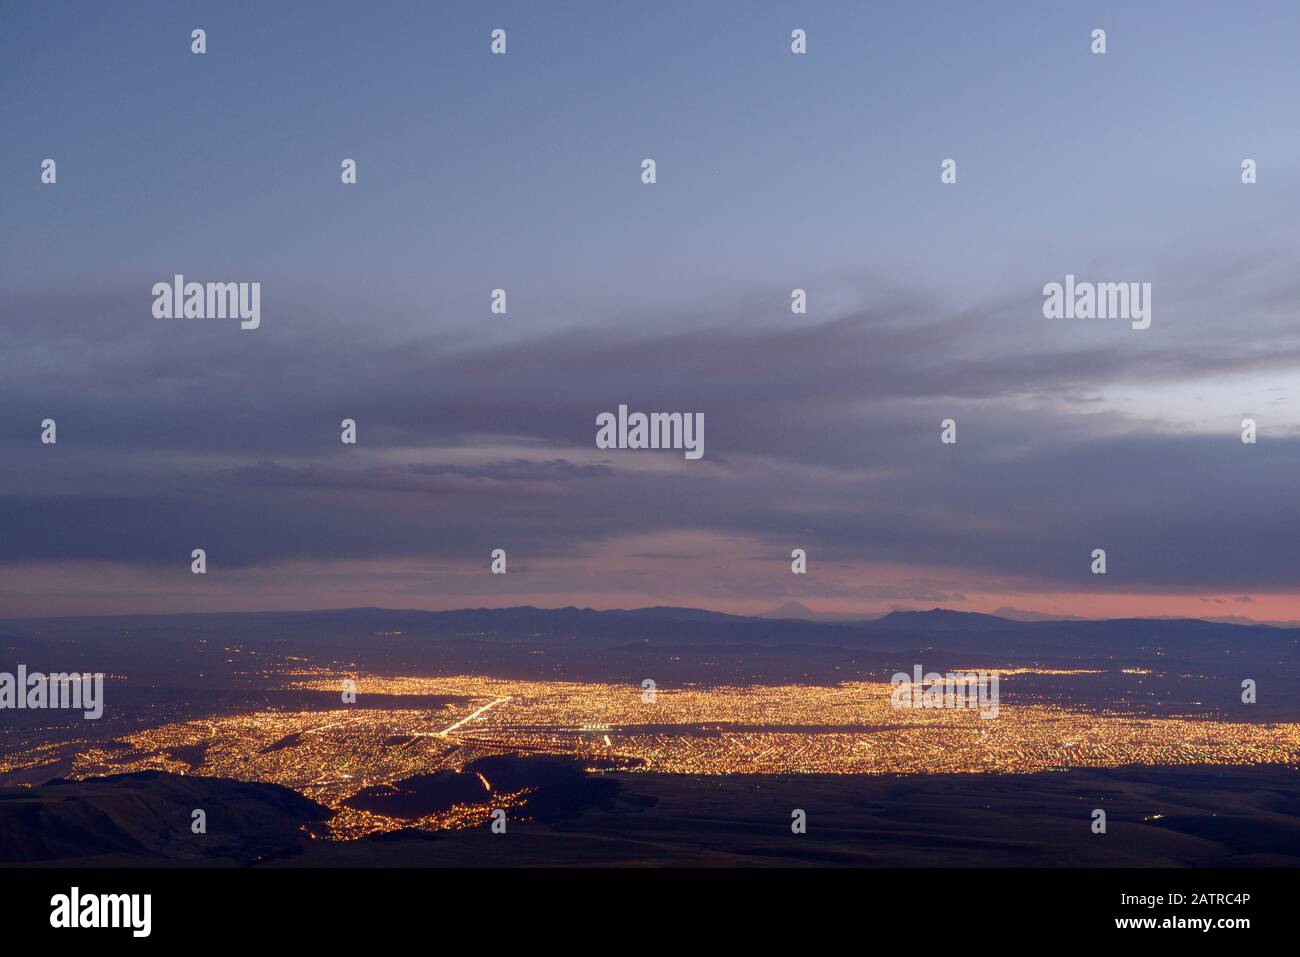 The city of El Alto seen from the Chacaltaya mountain. Stock Photo